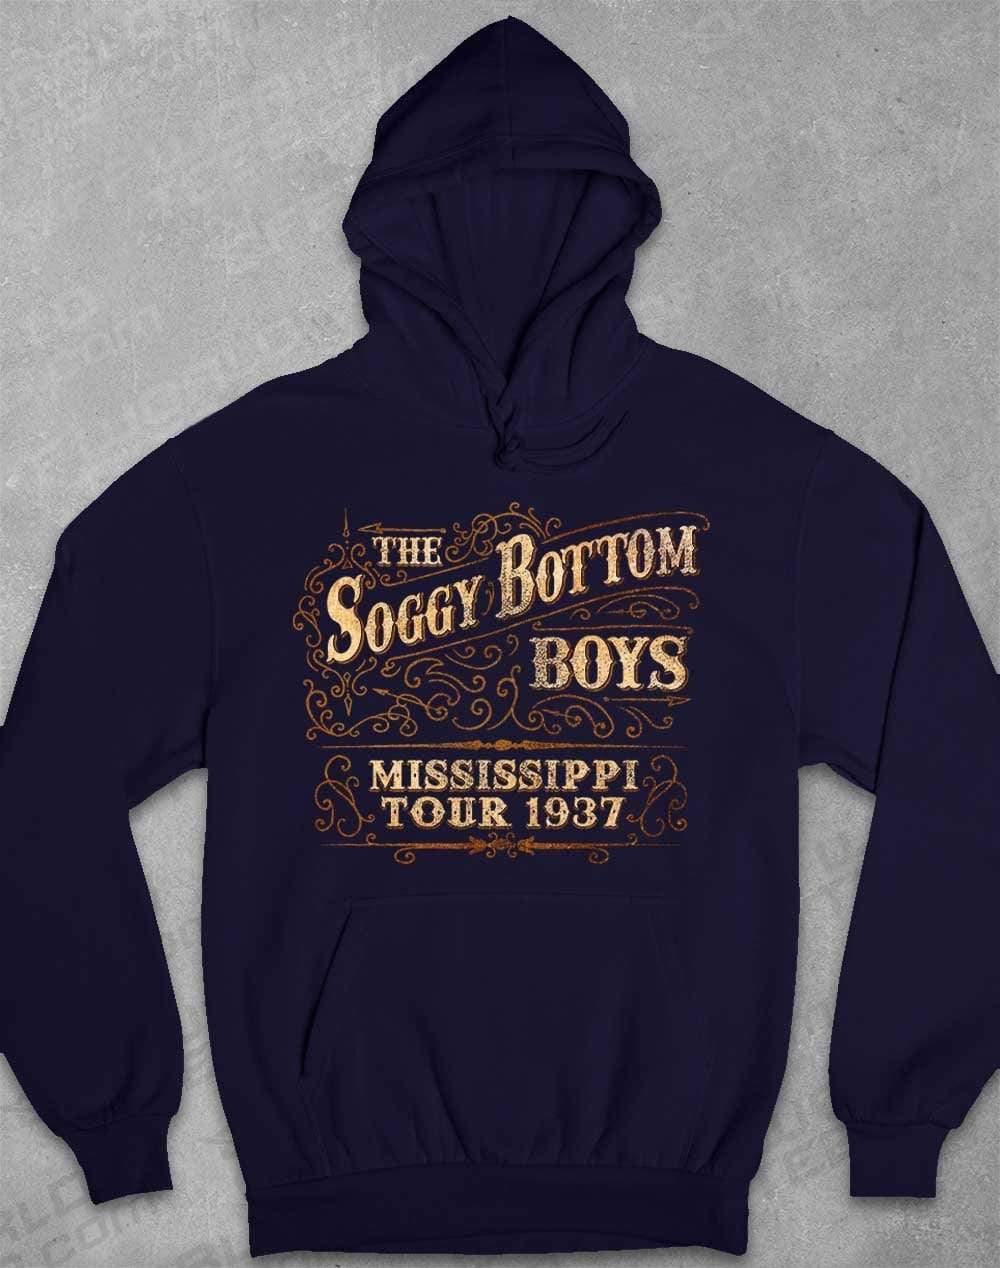 Soggy Bottom Boys Tour 1937 Hoodie XS / Oxford Navy  - Off World Tees